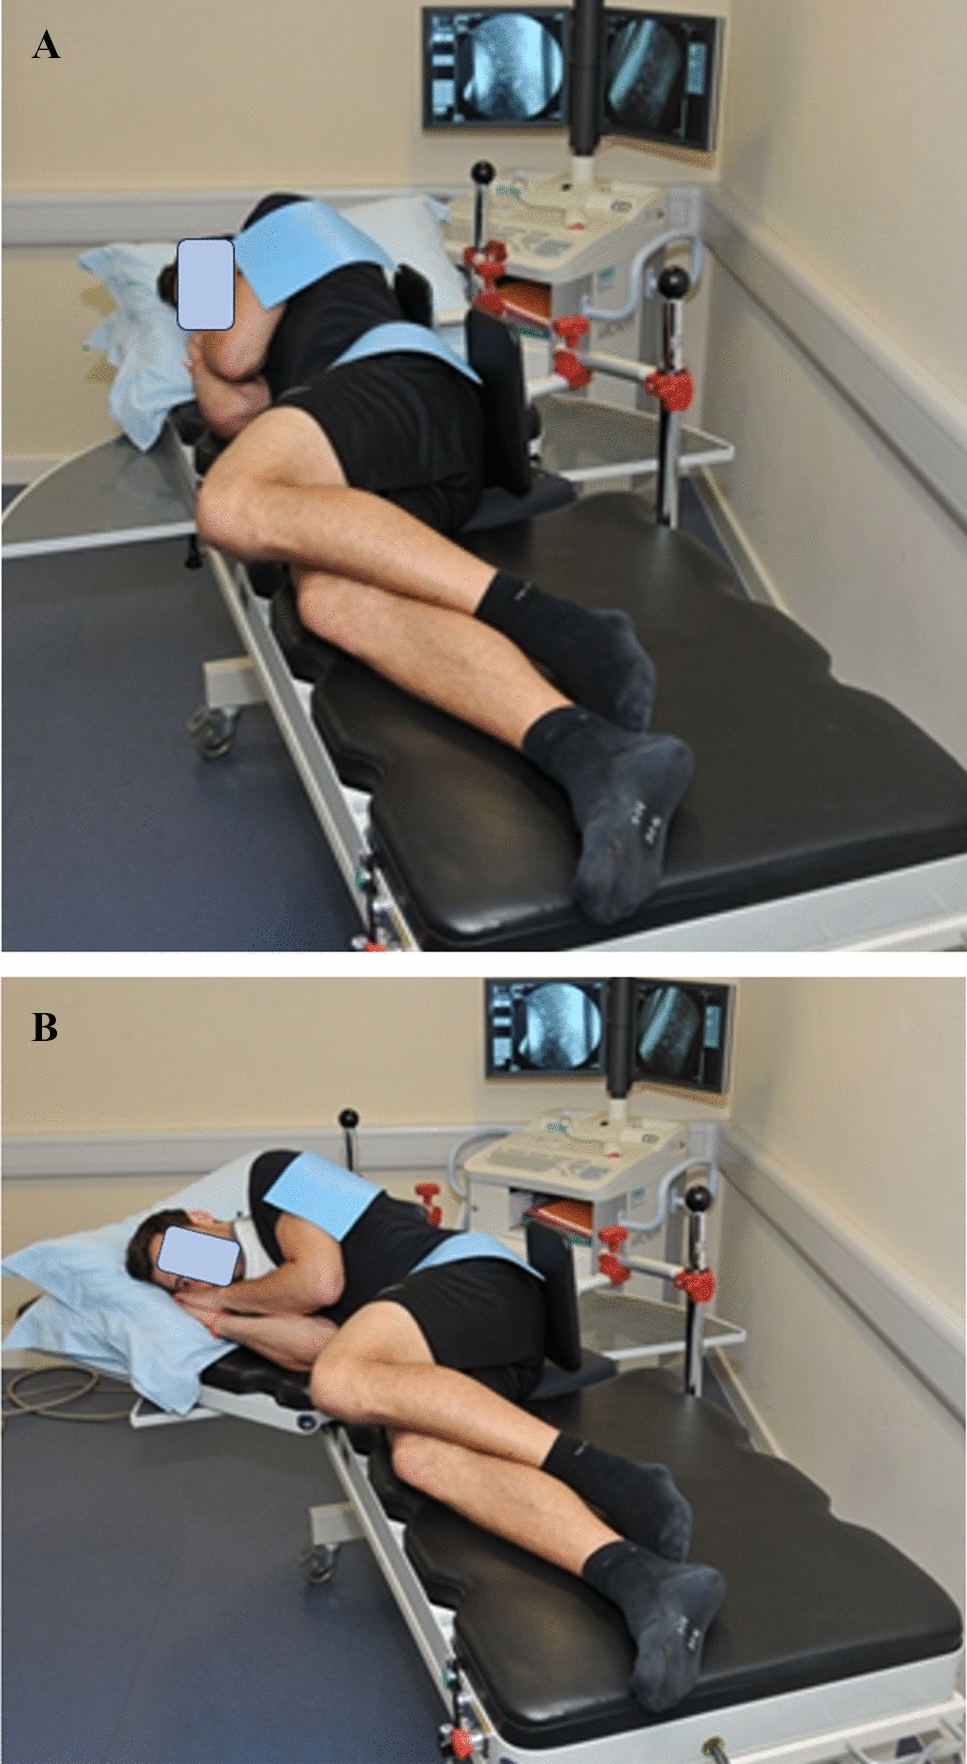 Passive intervertebral restraint is different in patients with treatment-resistant chronic nonspecific low back pain: a retrospective cohort study and control comparison